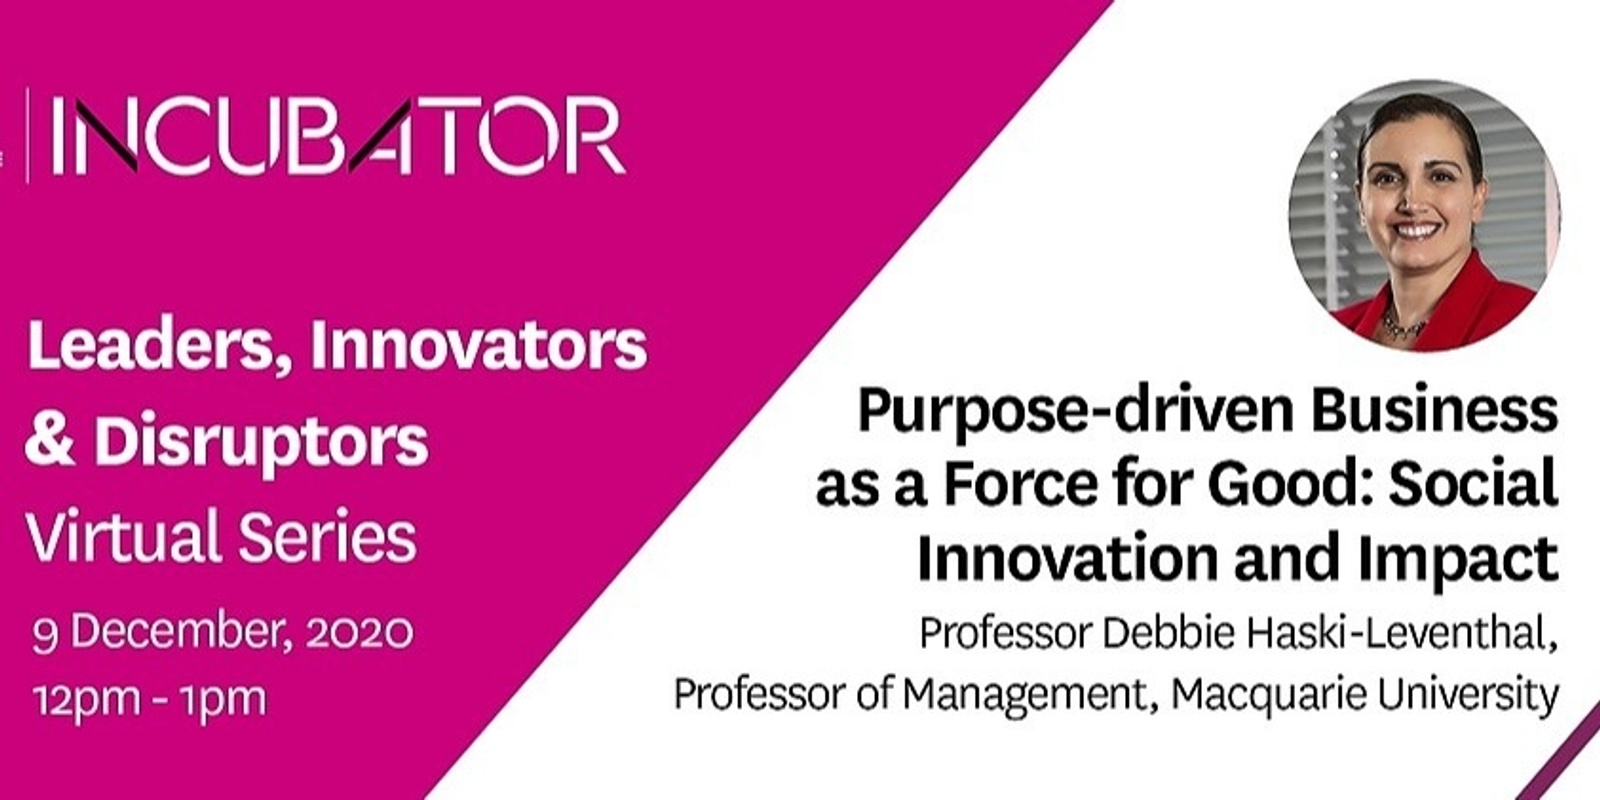 Banner image for MQ Incubator Leaders, Innovators & Disrupters Event | Purpose-driven Business as a Force for Good: Social Innovation and Impact